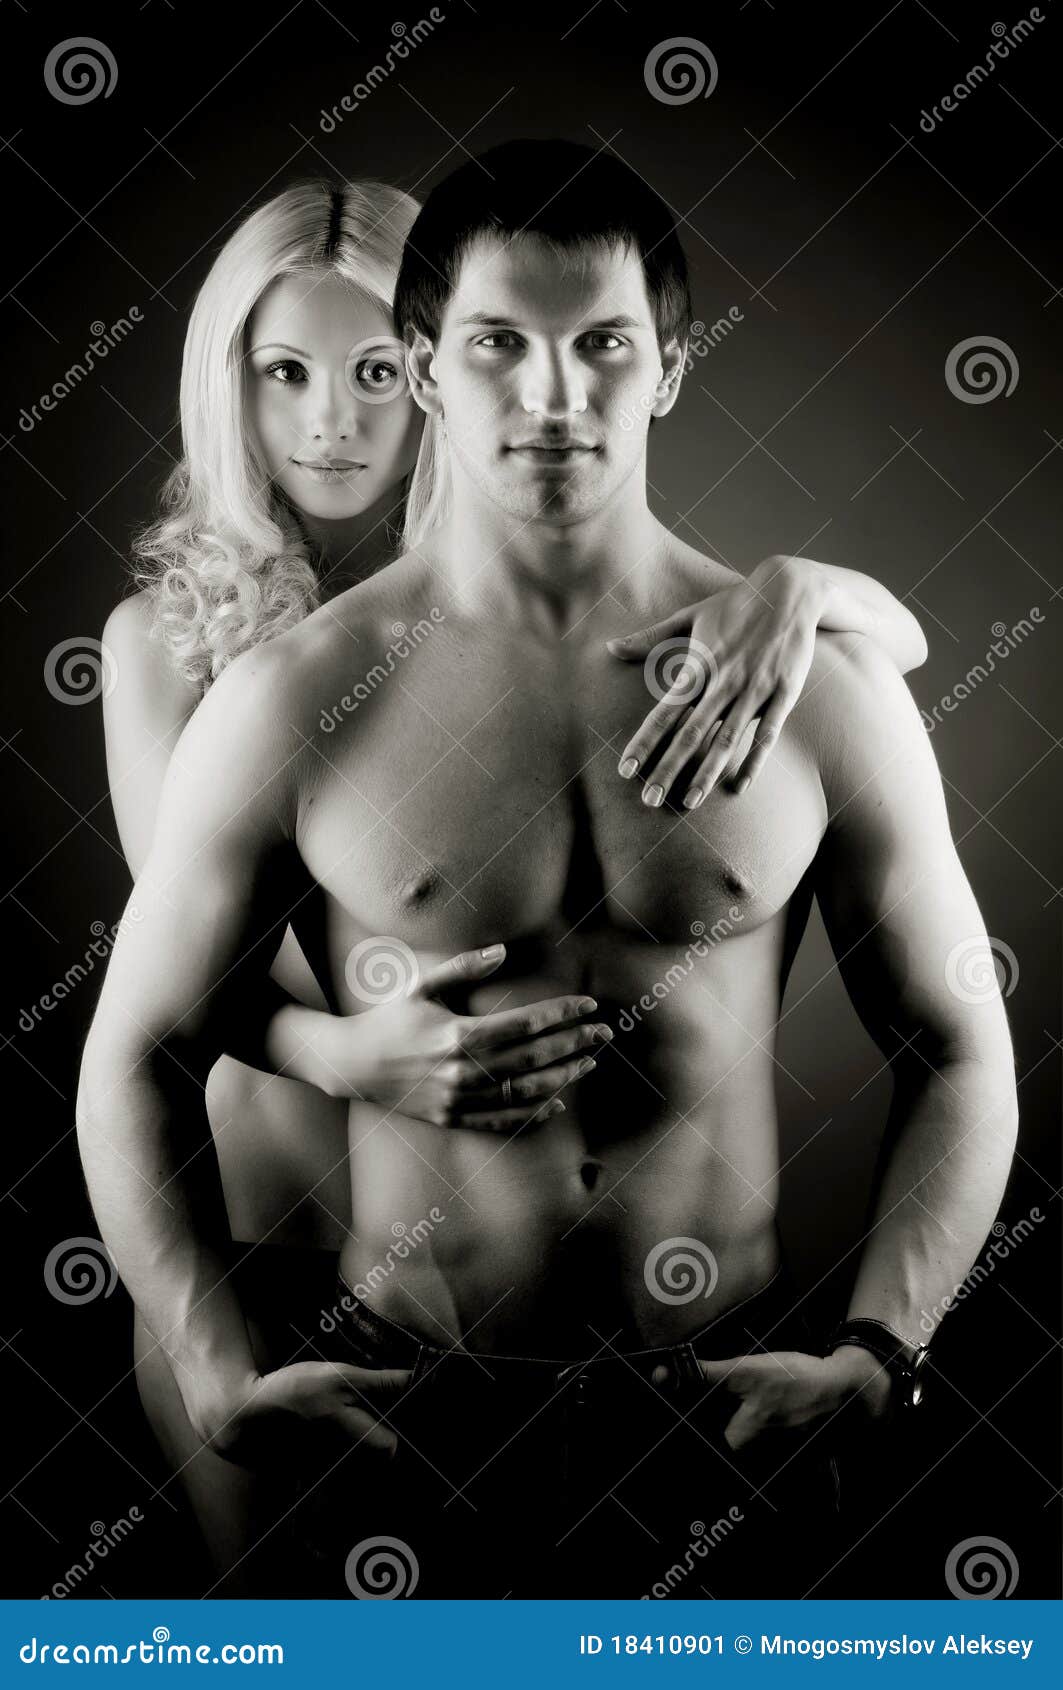 Couple stock image pic pic